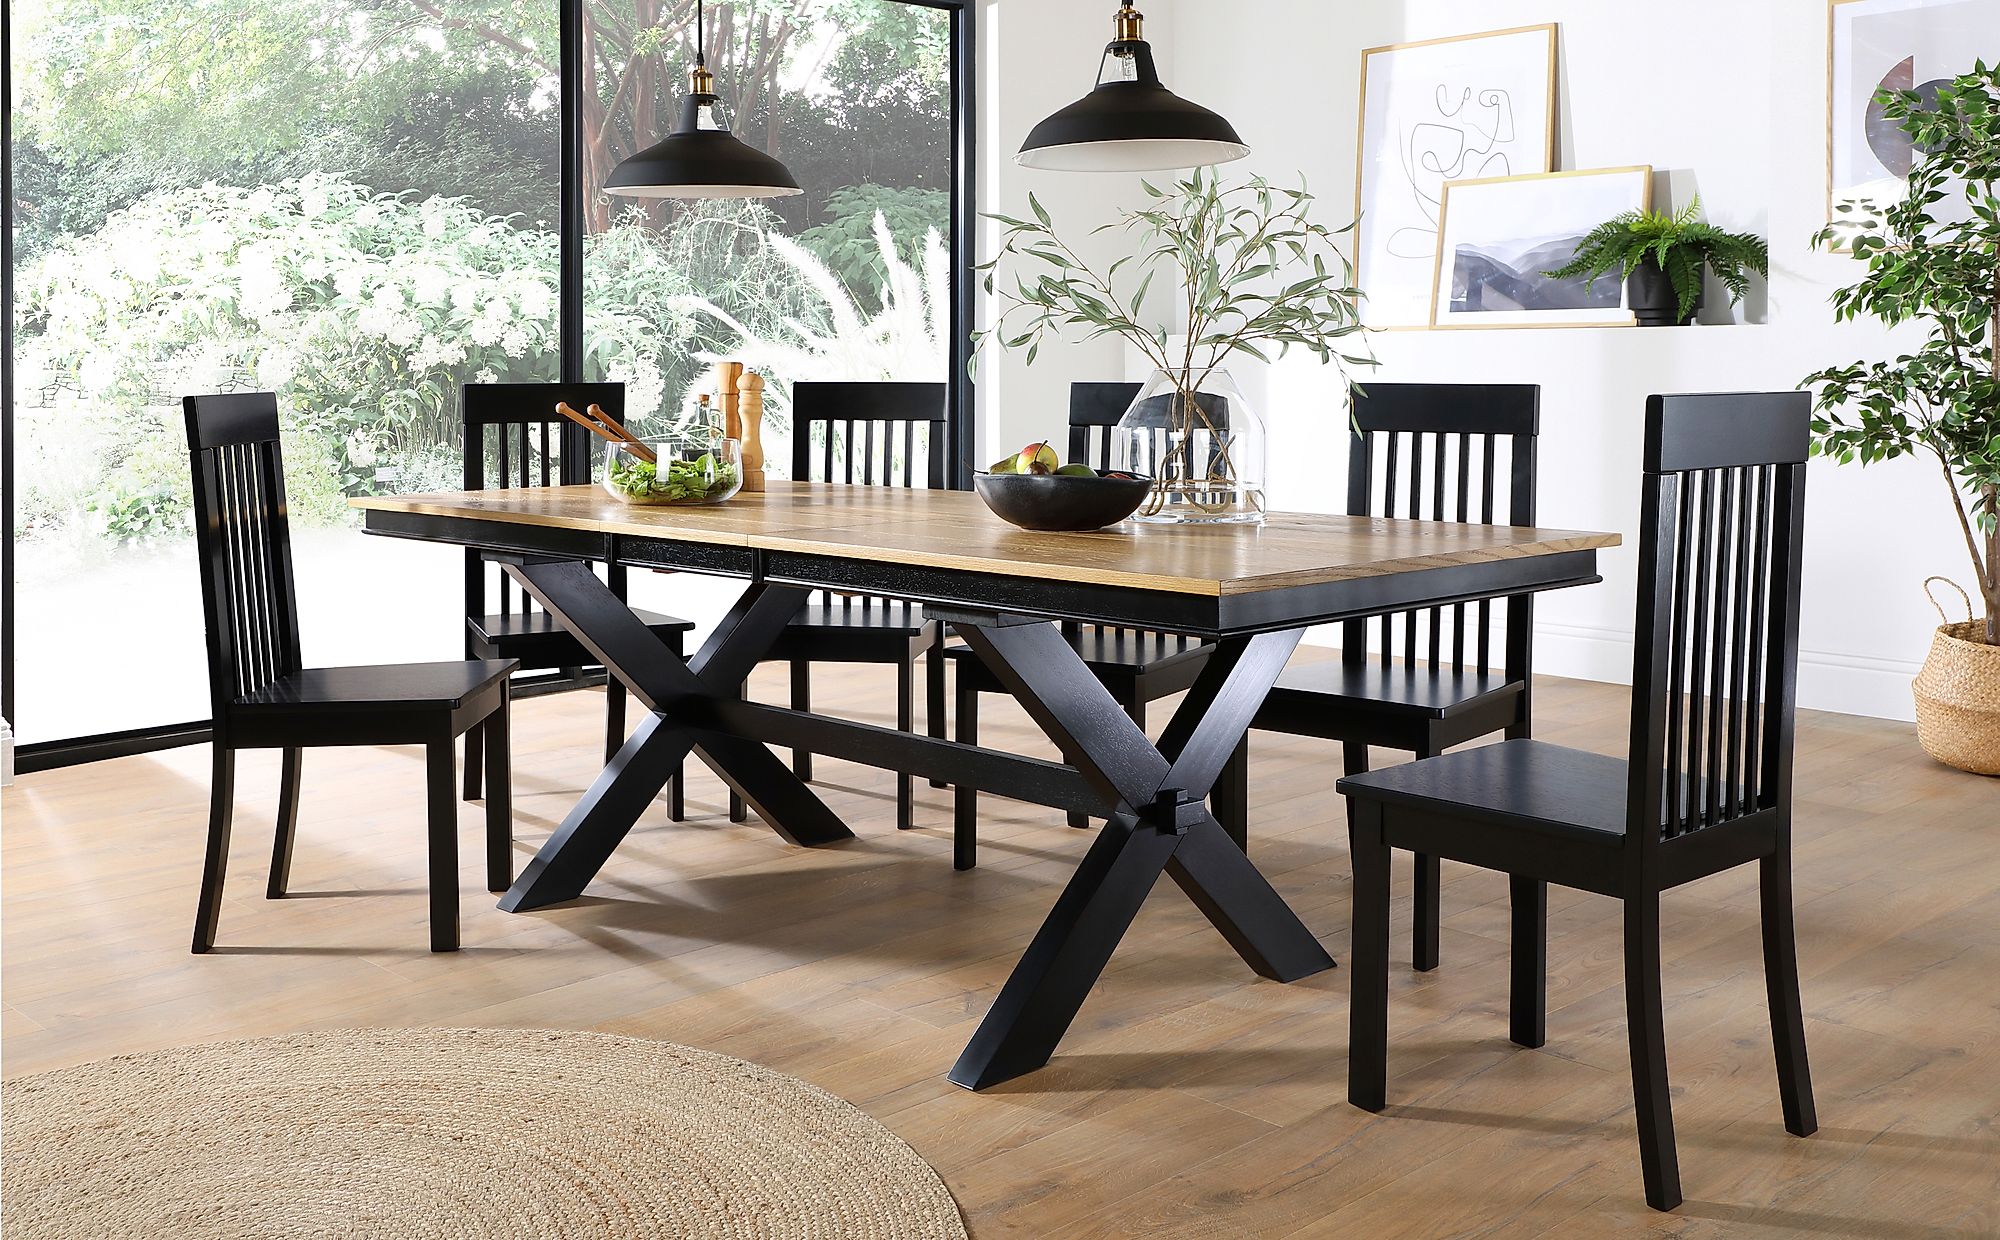 Dining Room With Wood Table And Black Chairs